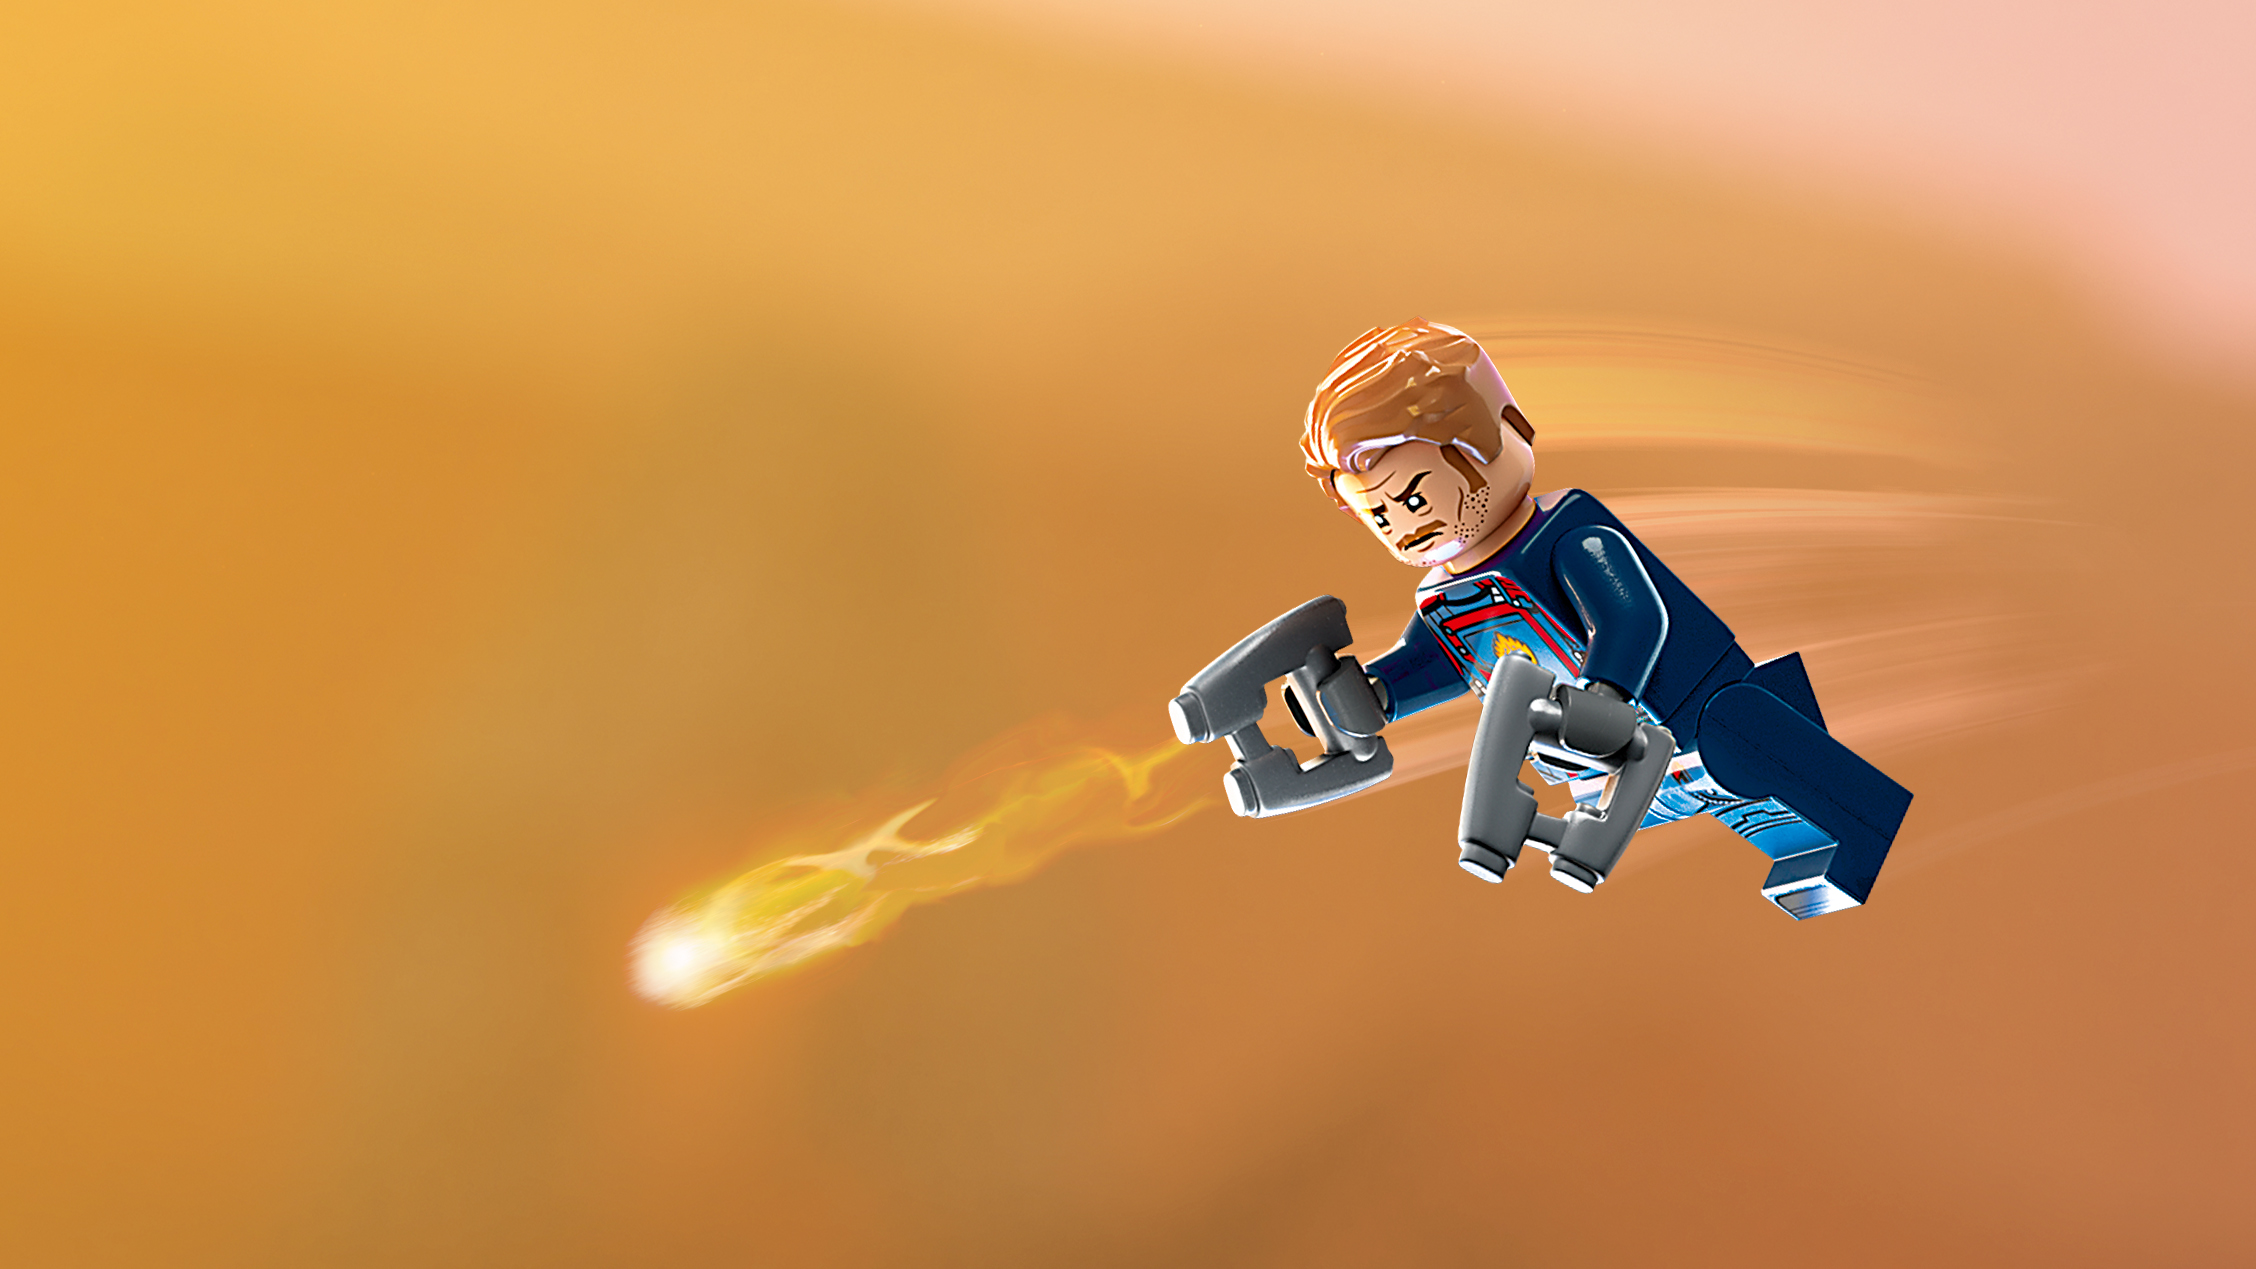 lego marvel superheroes guardians of the galaxy starlord